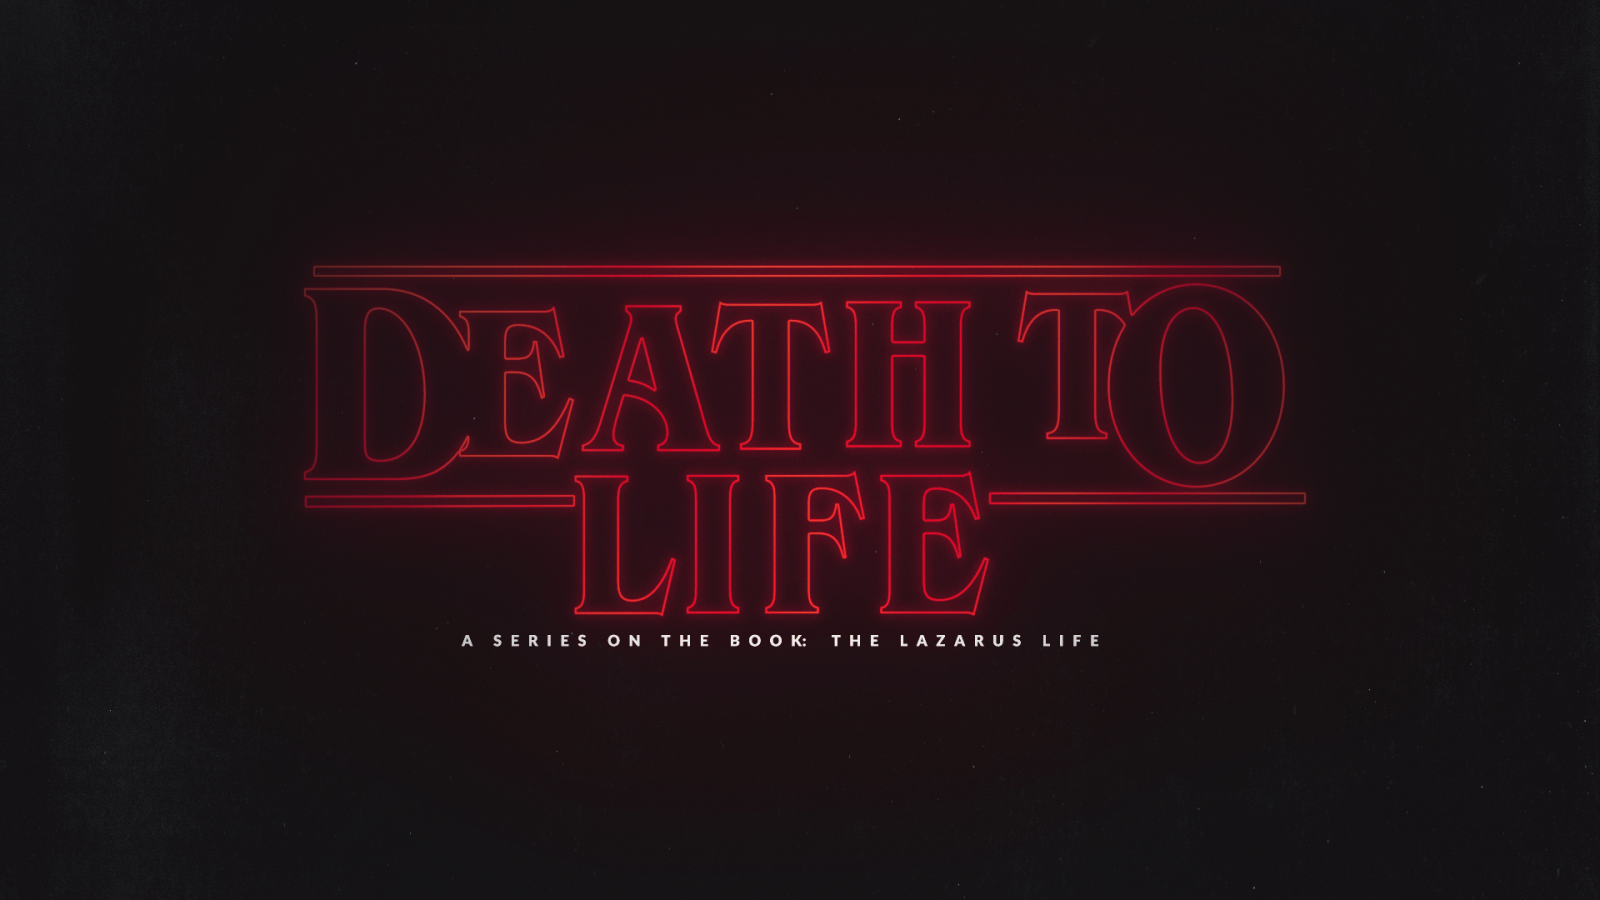 Death To Life